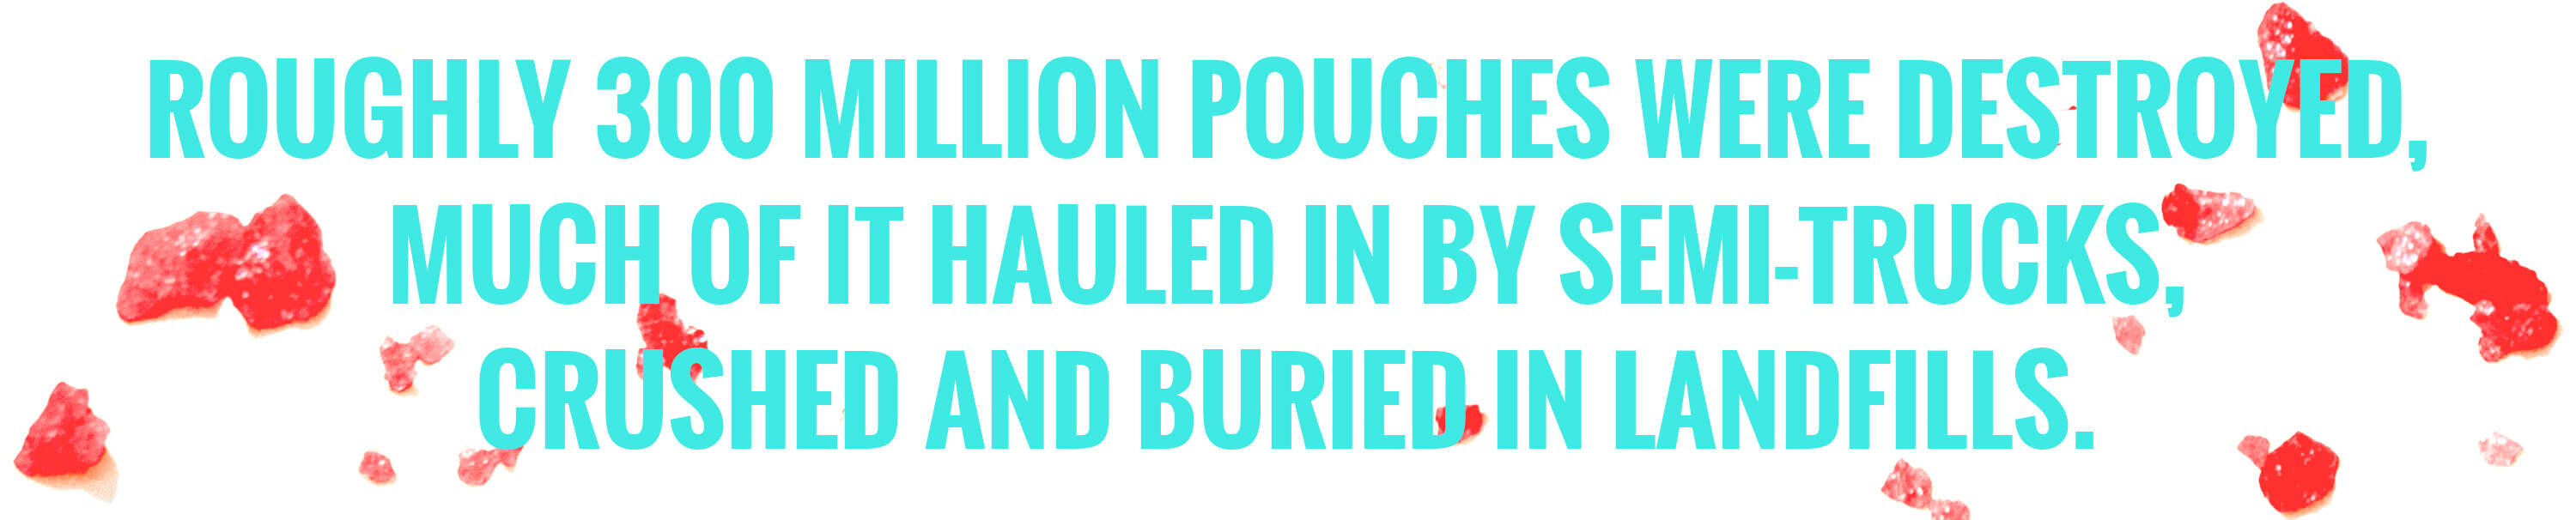 Roughly 300 million pouches were destroyed.